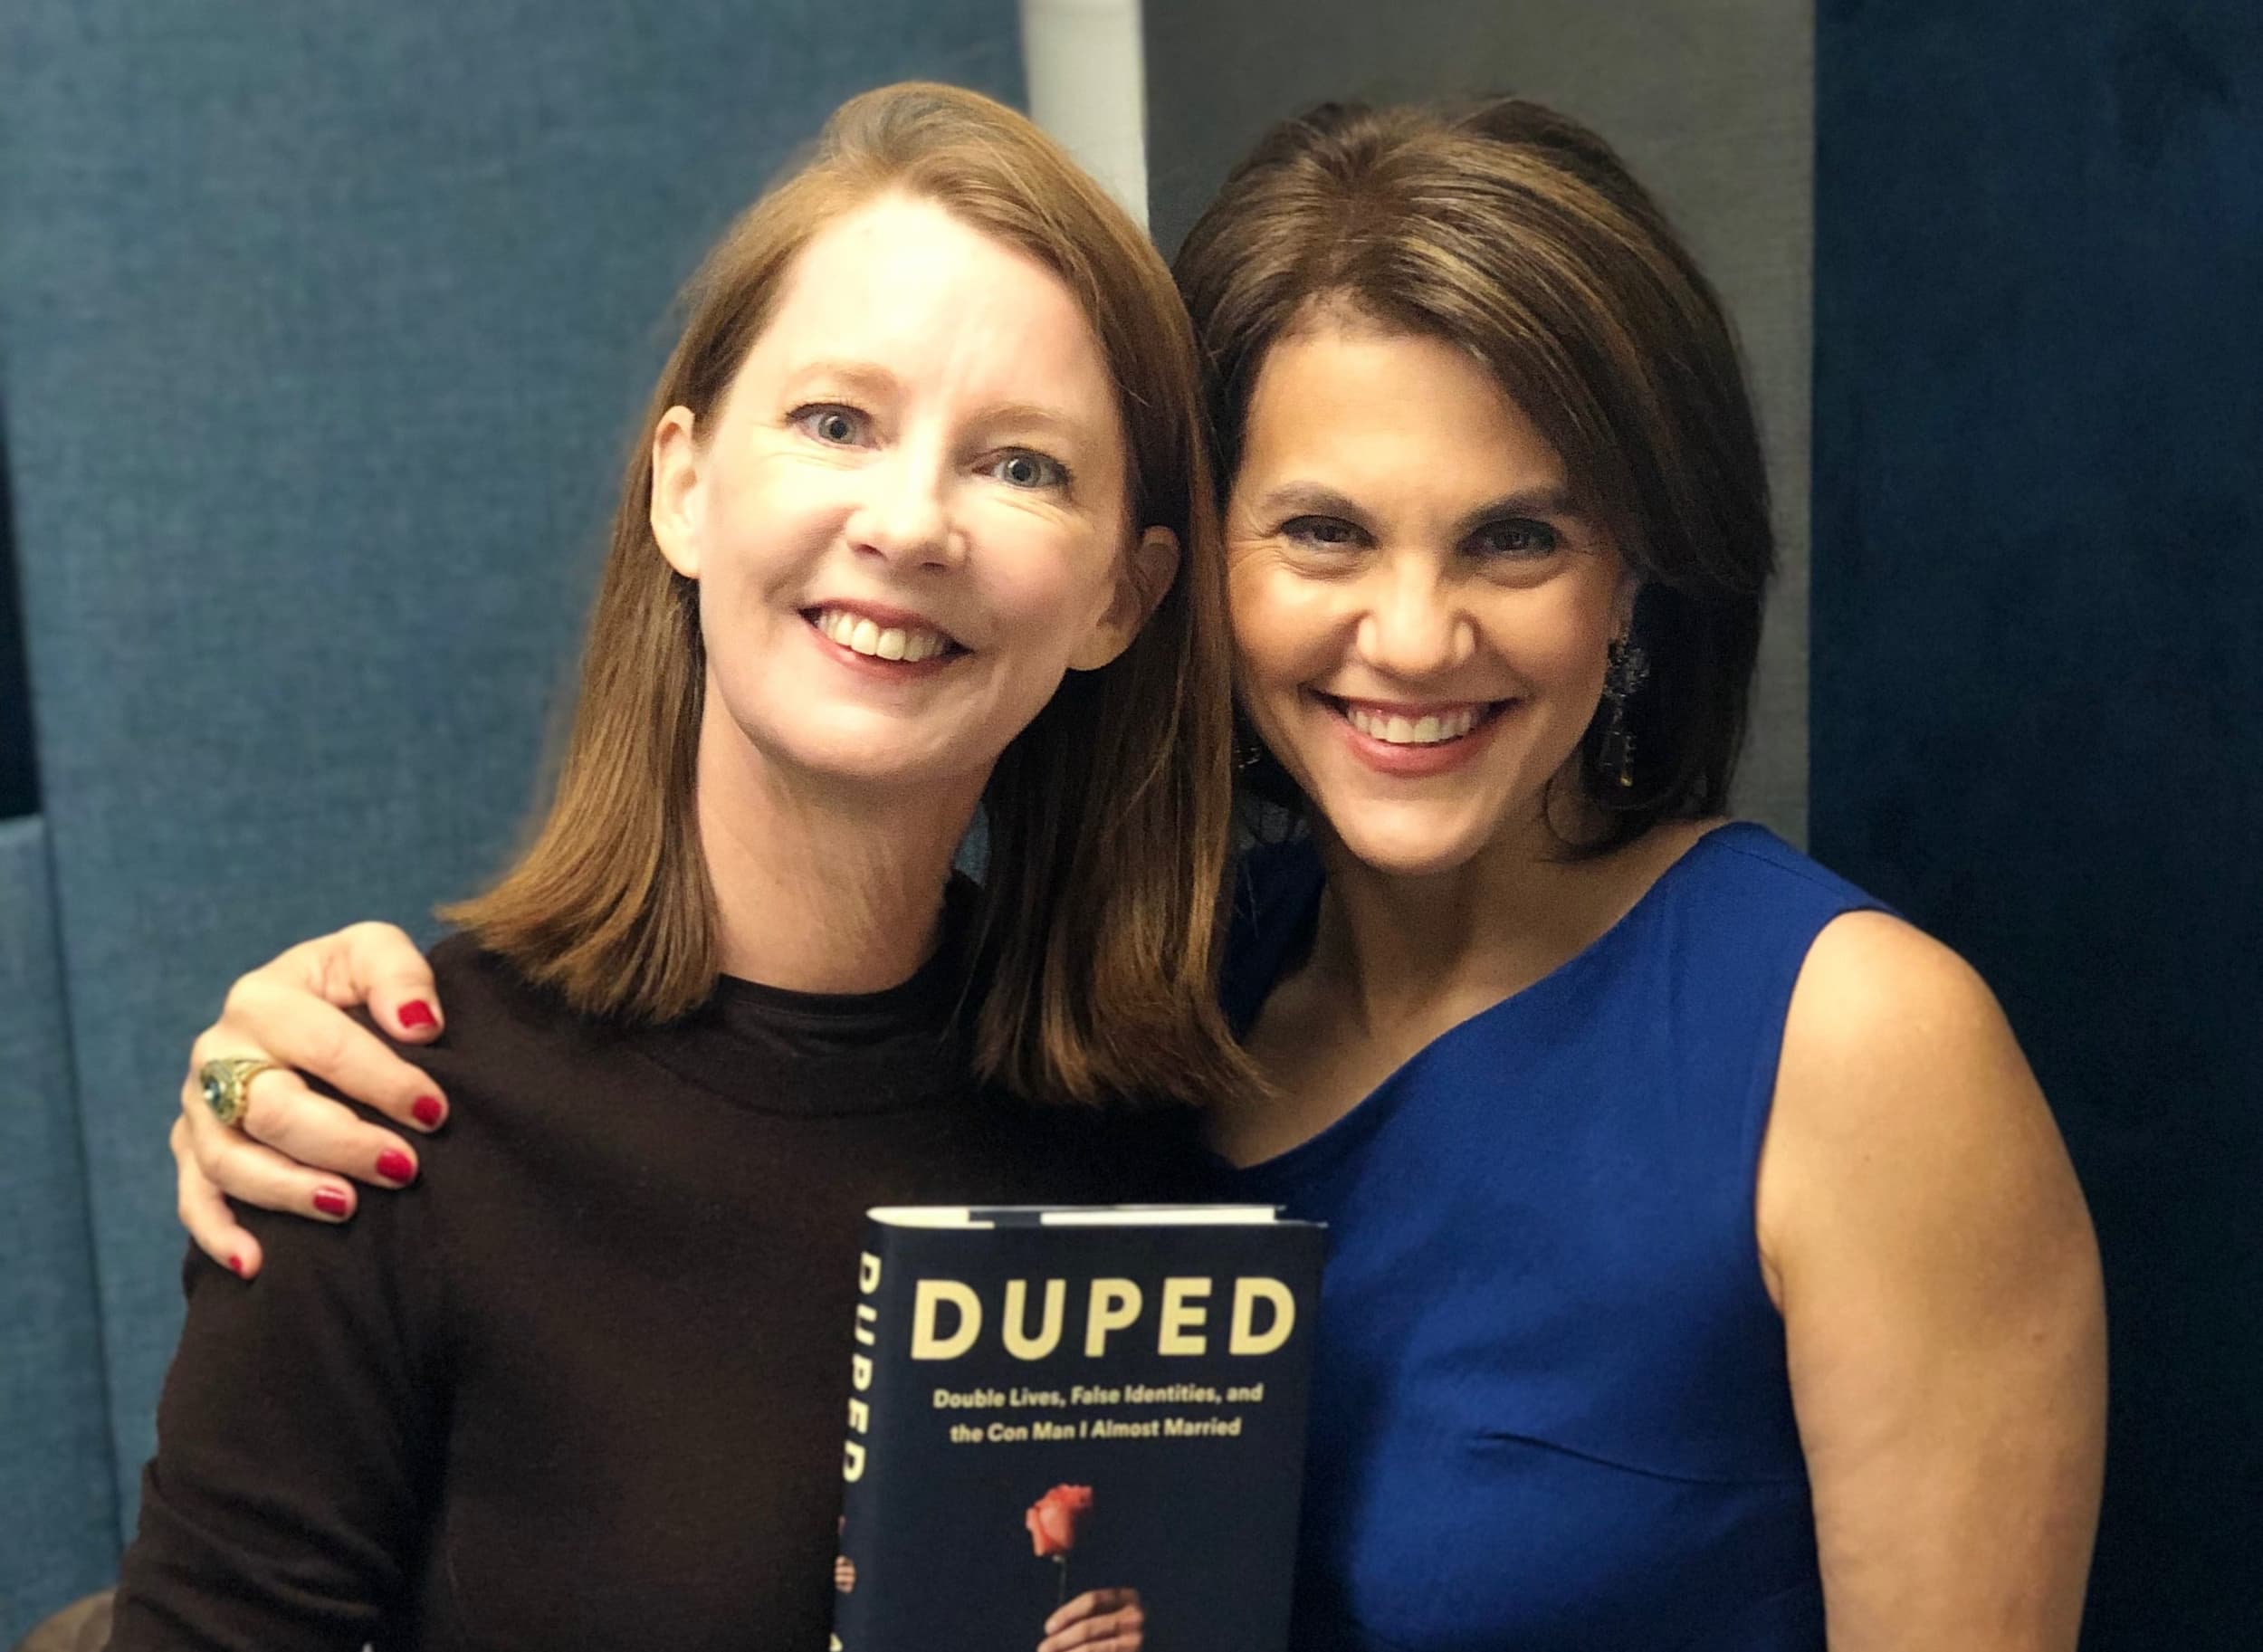 Gretchen with Abby Ellin author of Duped